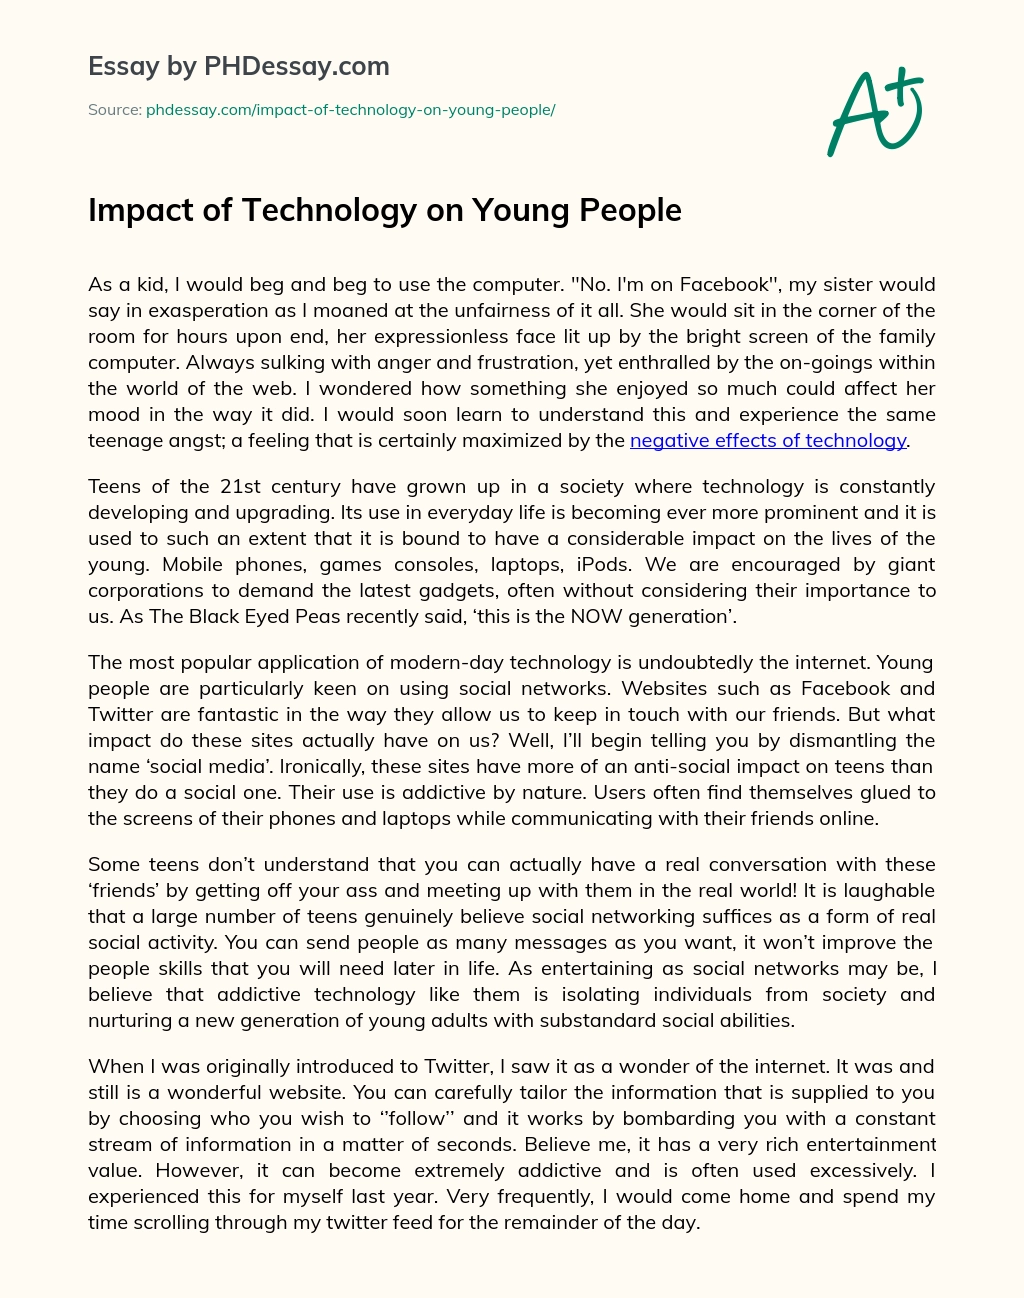 Impact of Technology on Young People essay